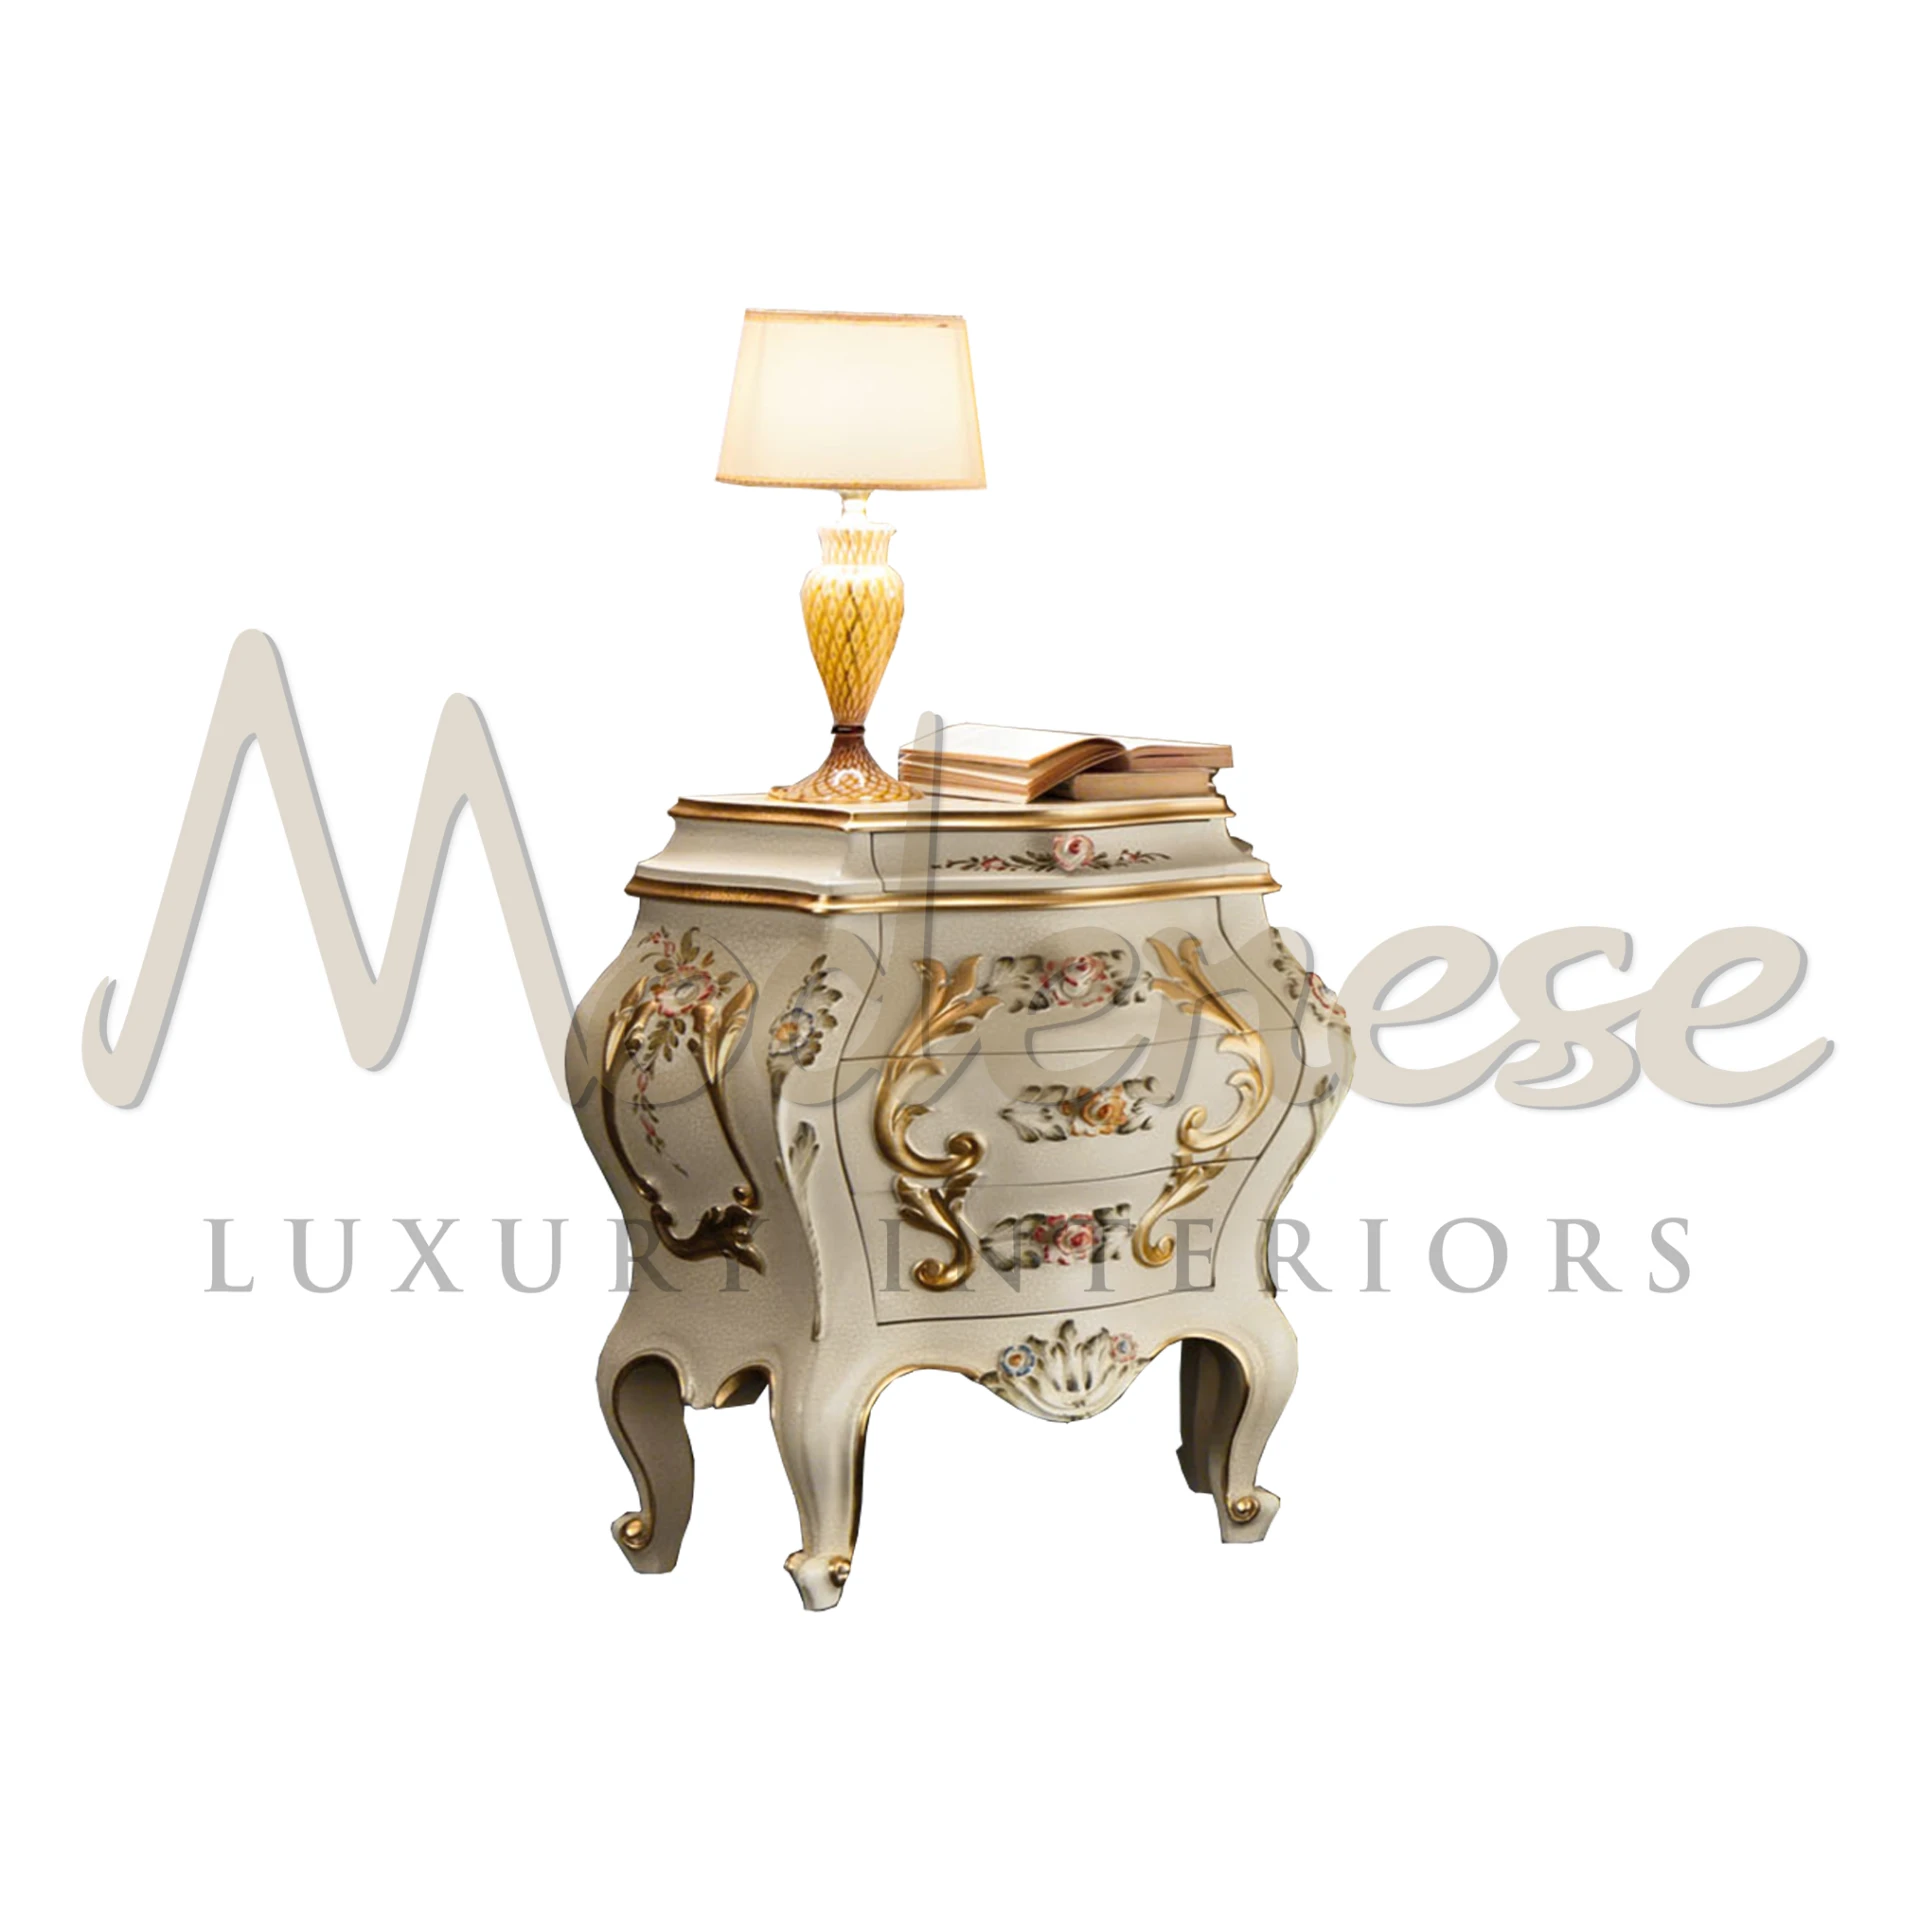 Ornate hand-painted nightstand with floral designs and gold trim, topped with a golden pineapple-shaped table lamp with a cream lampshade and a small stack of hardcover books.